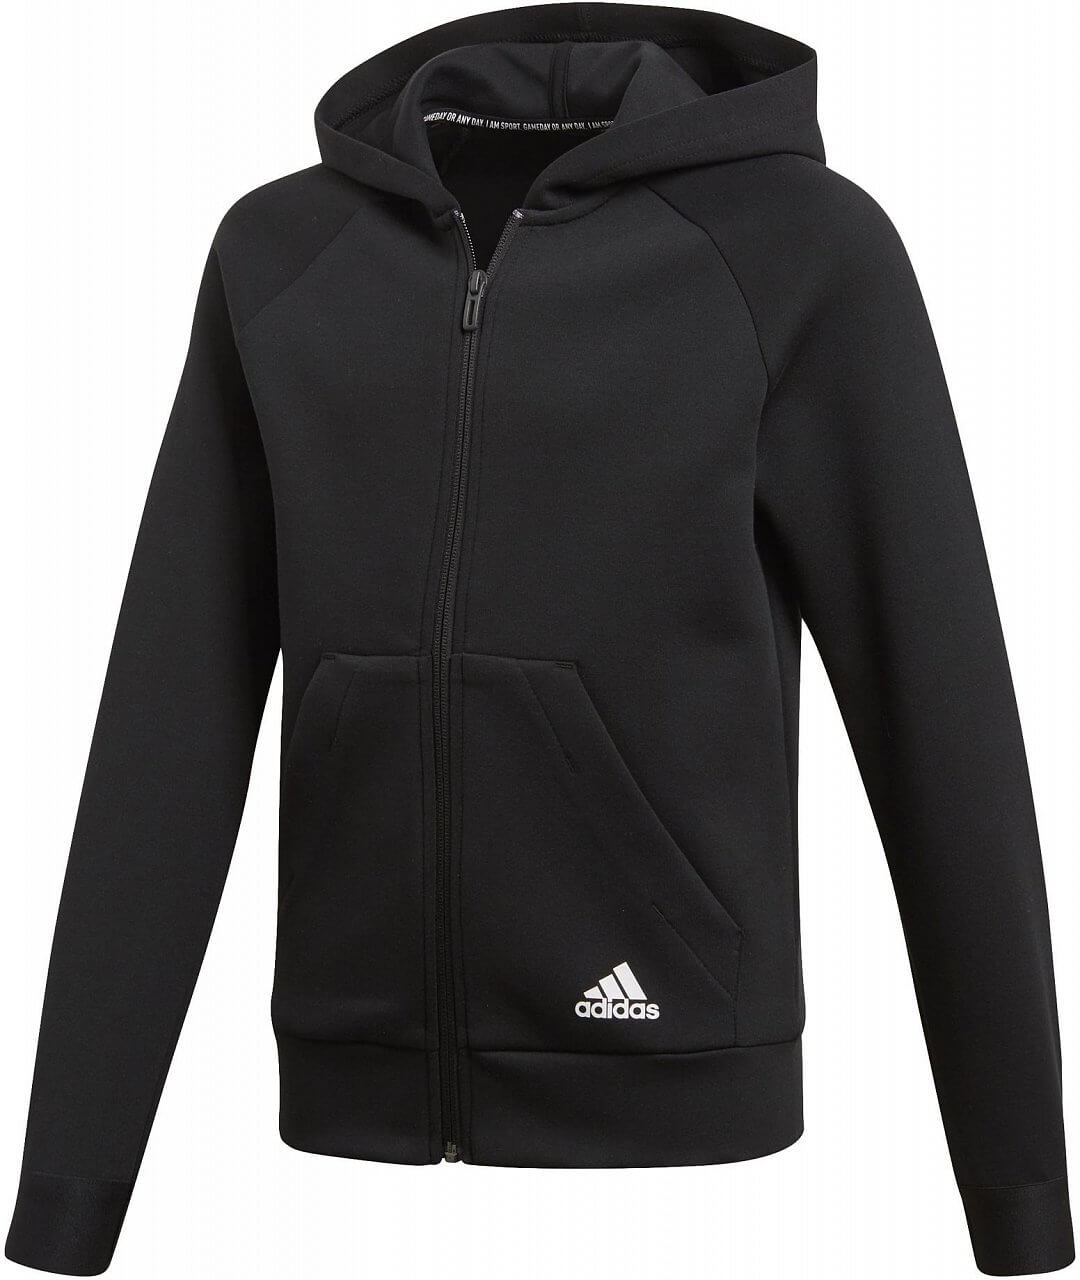 Jopice adidas Youth Girls Must Haves Plain Full Zip Hoodie